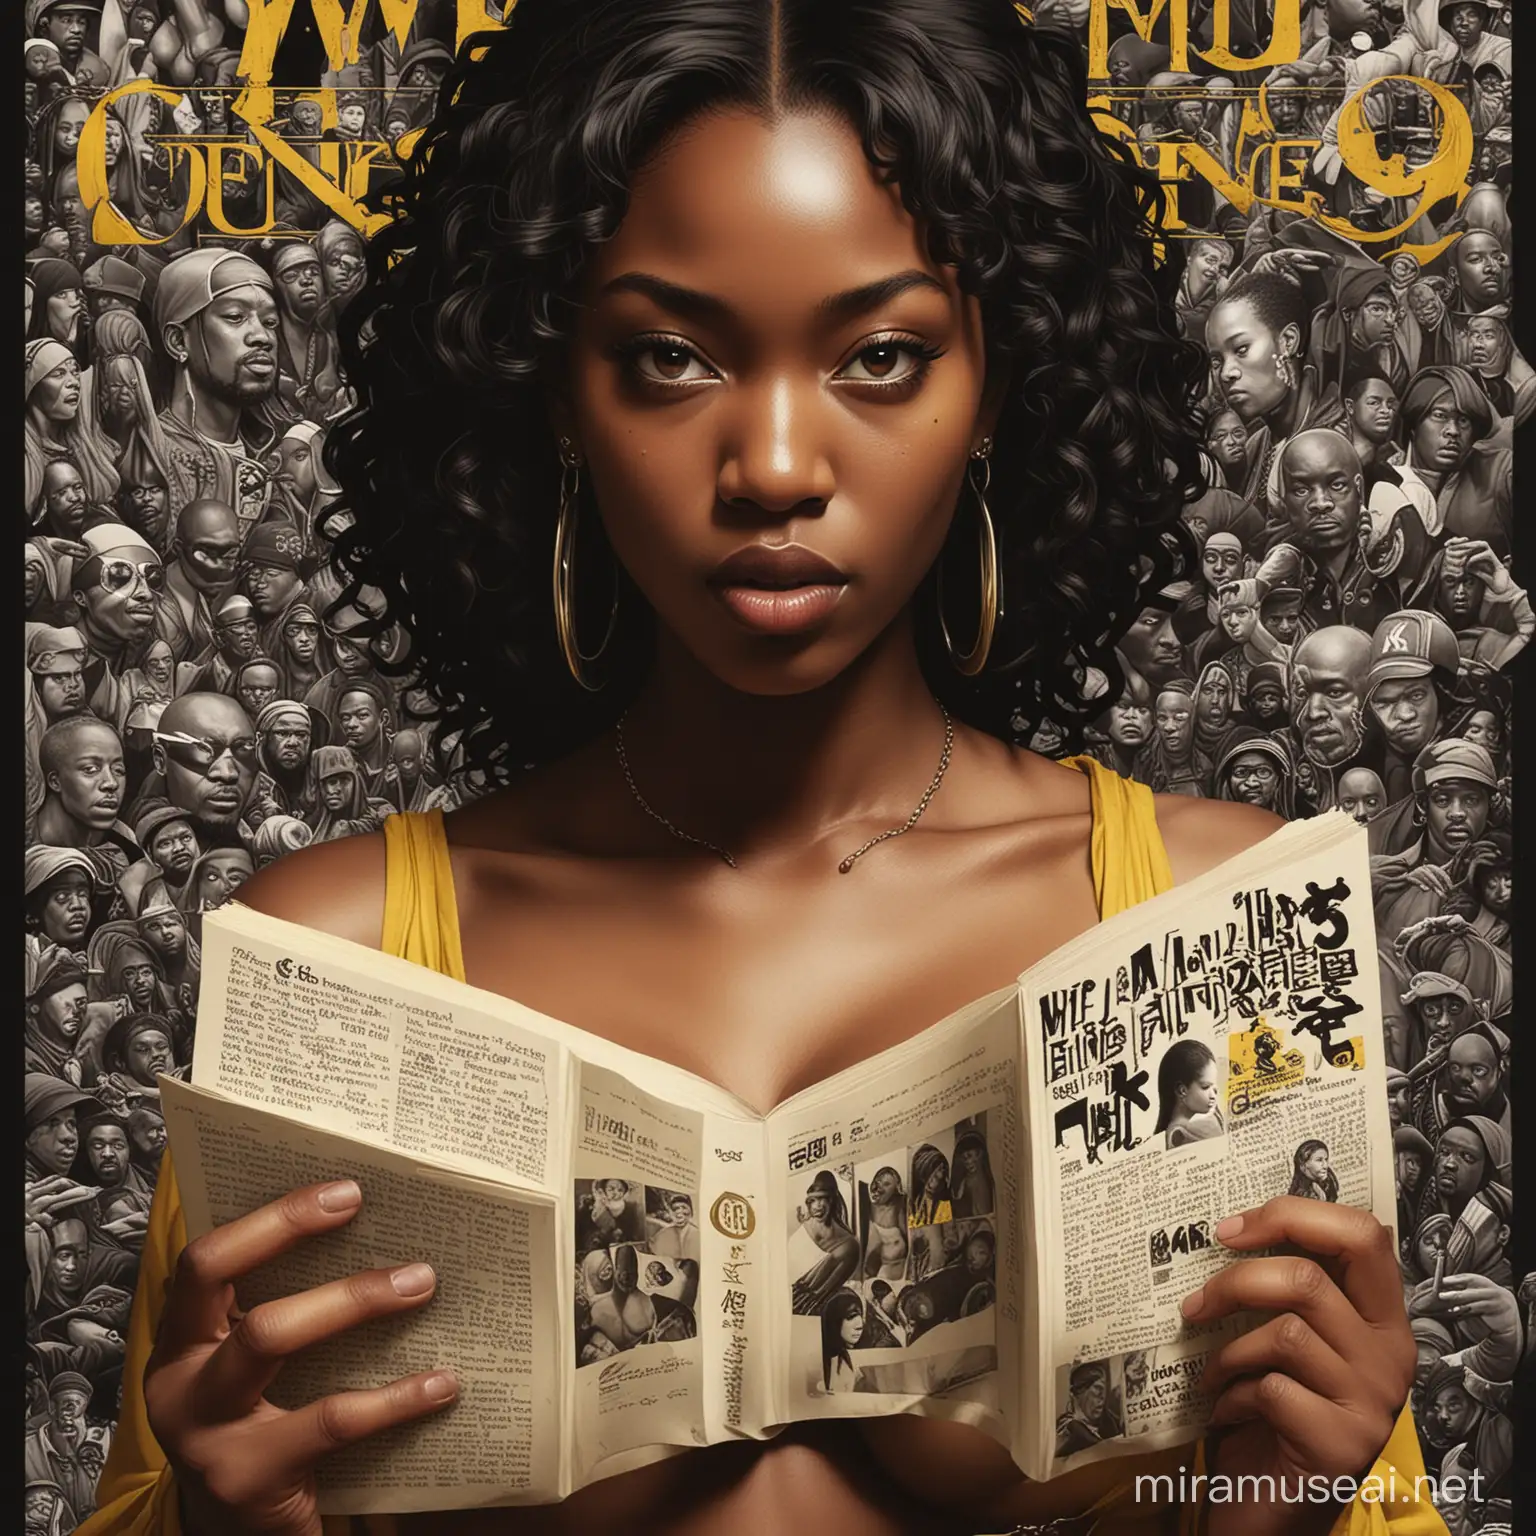 Illustrated Book Cover Enter the WuTang 36 Chambers Featuring Stunning Black Woman